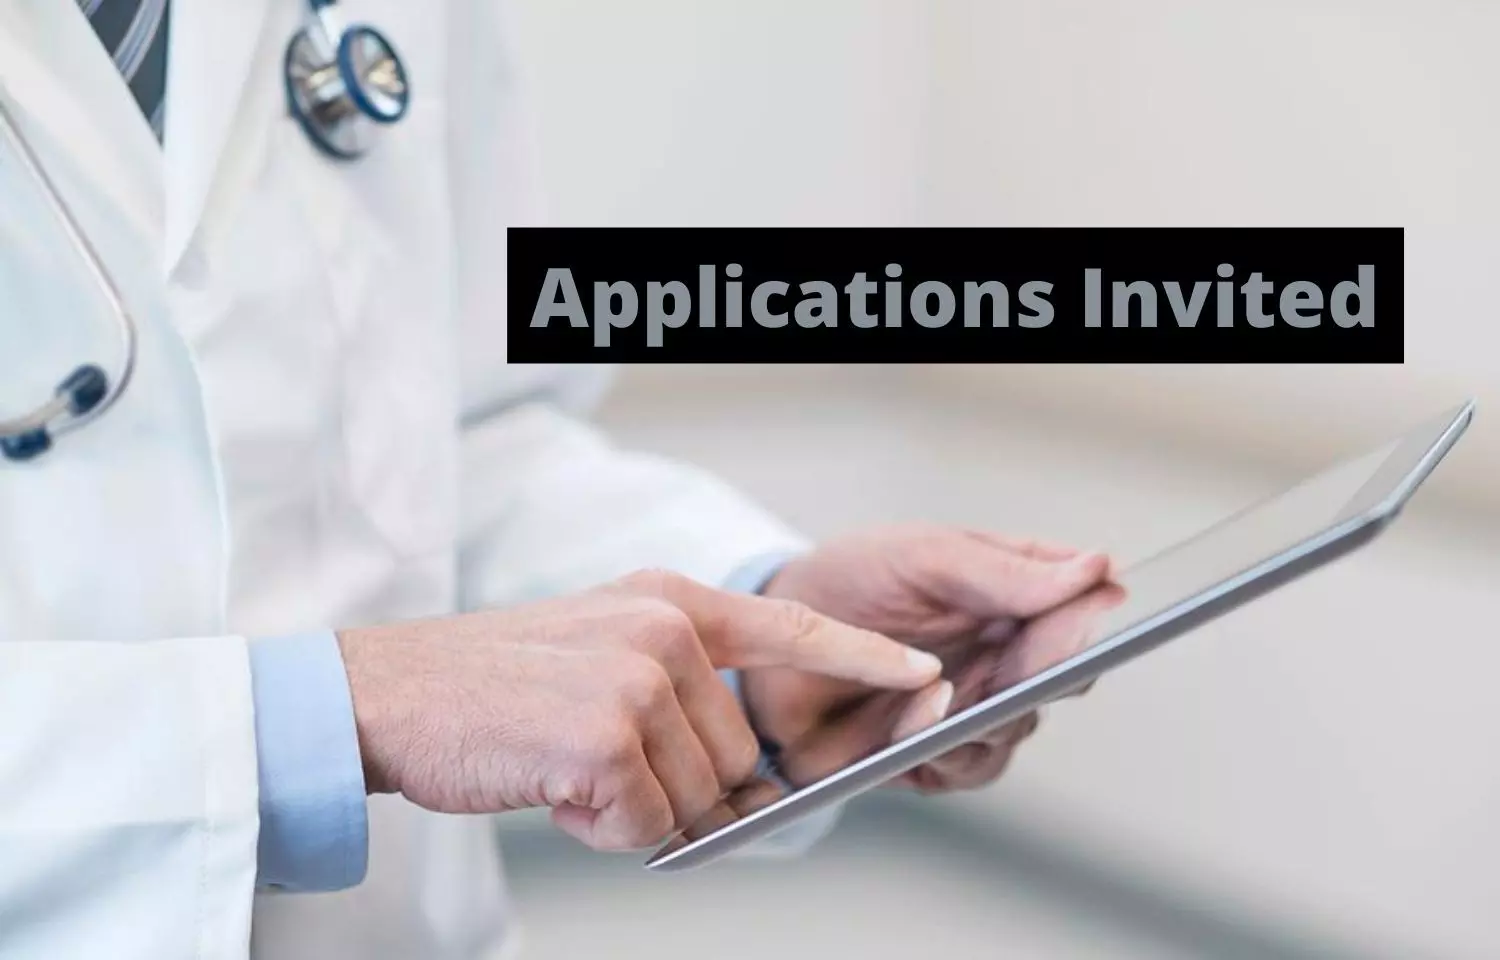 DME Tripura invites applications for PG medical admissions in RIMS, MBBS graduates, Inservice doctors can apply